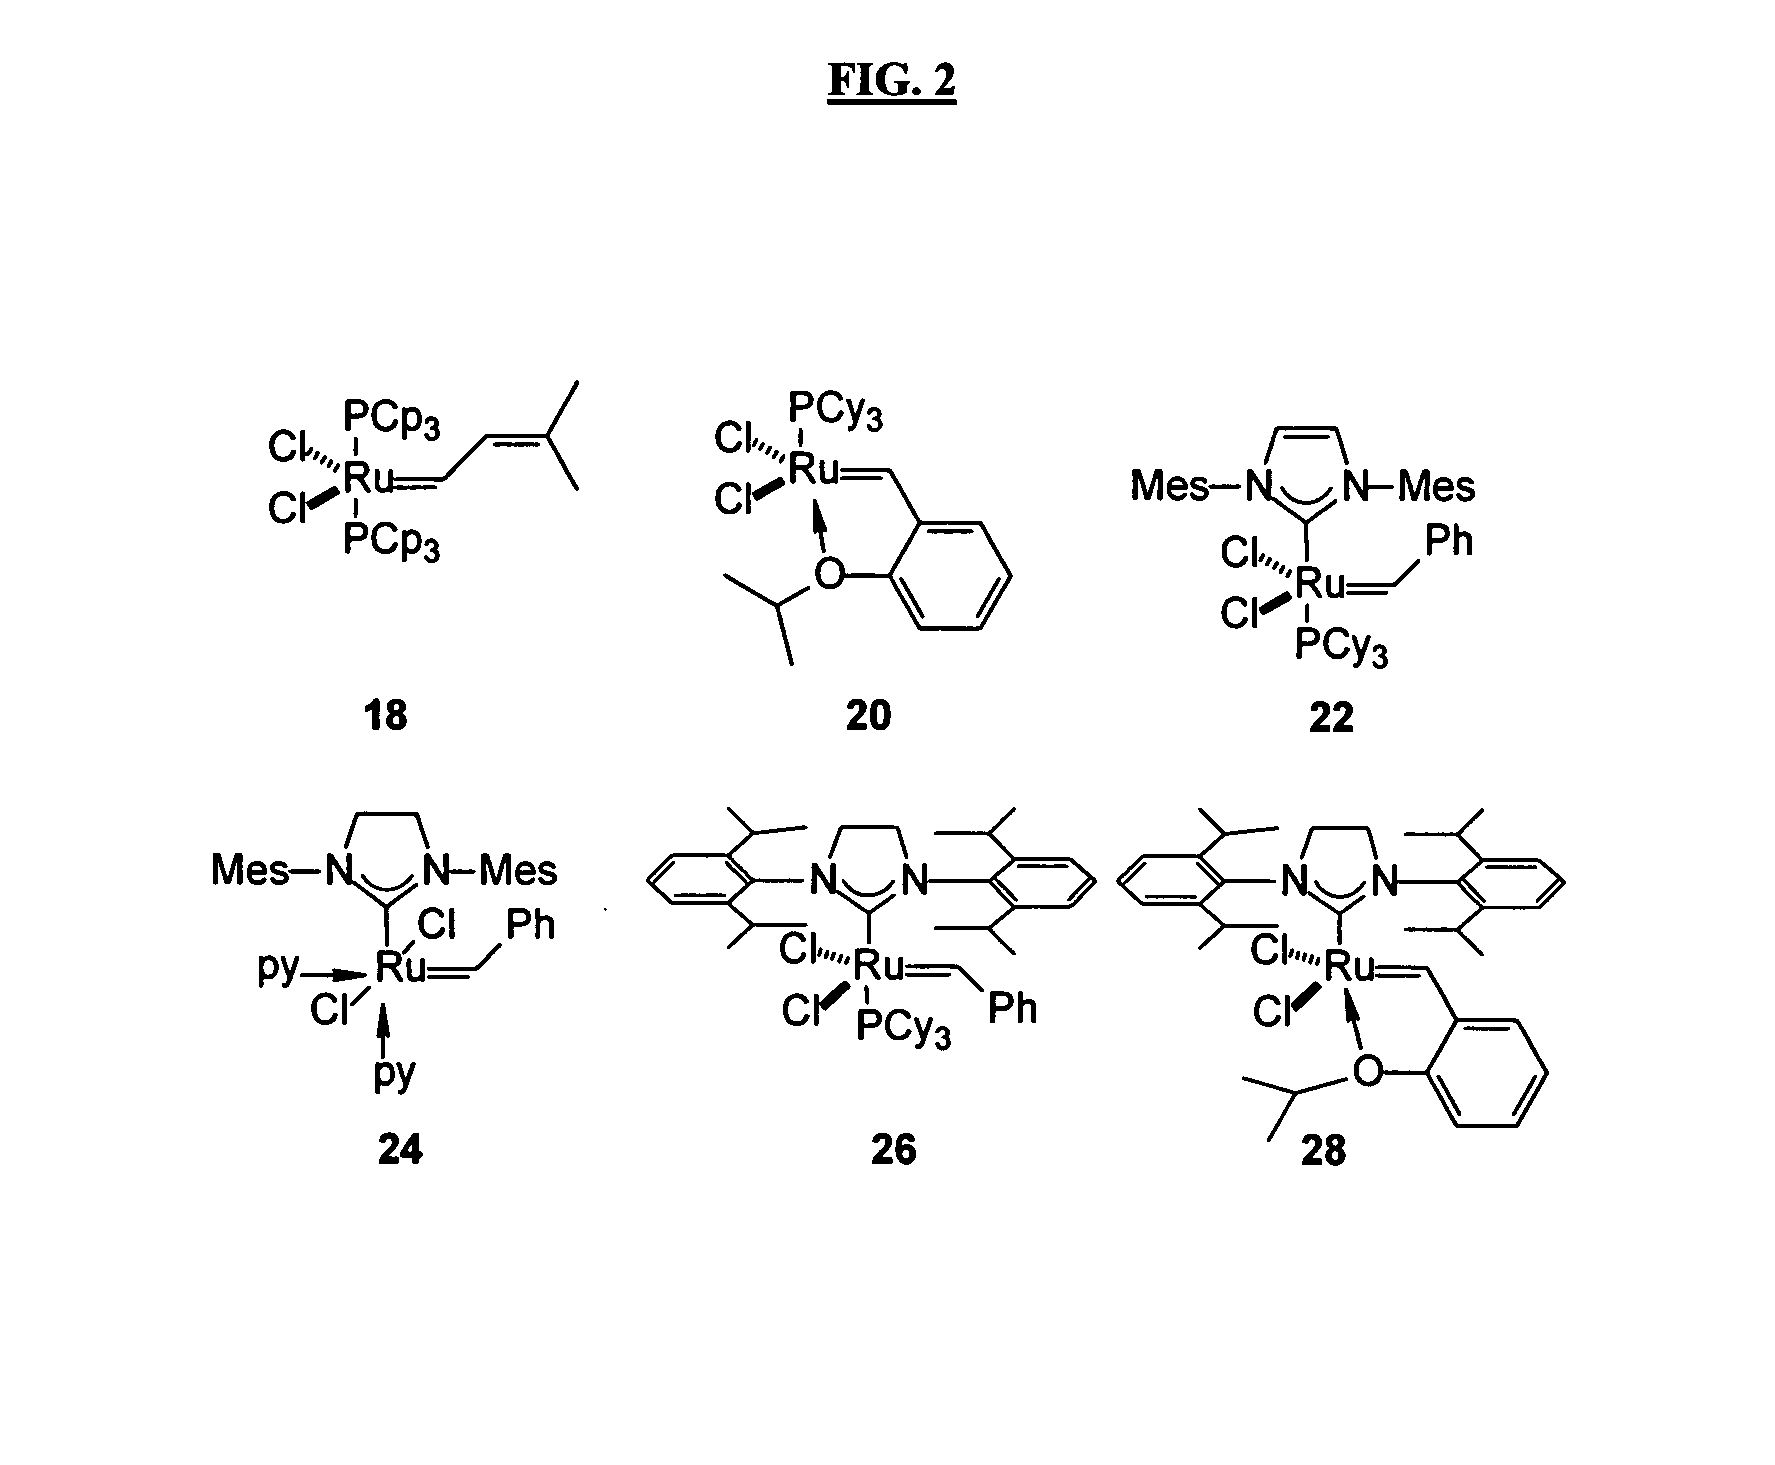 Antimicrobial compositions, methods and systems